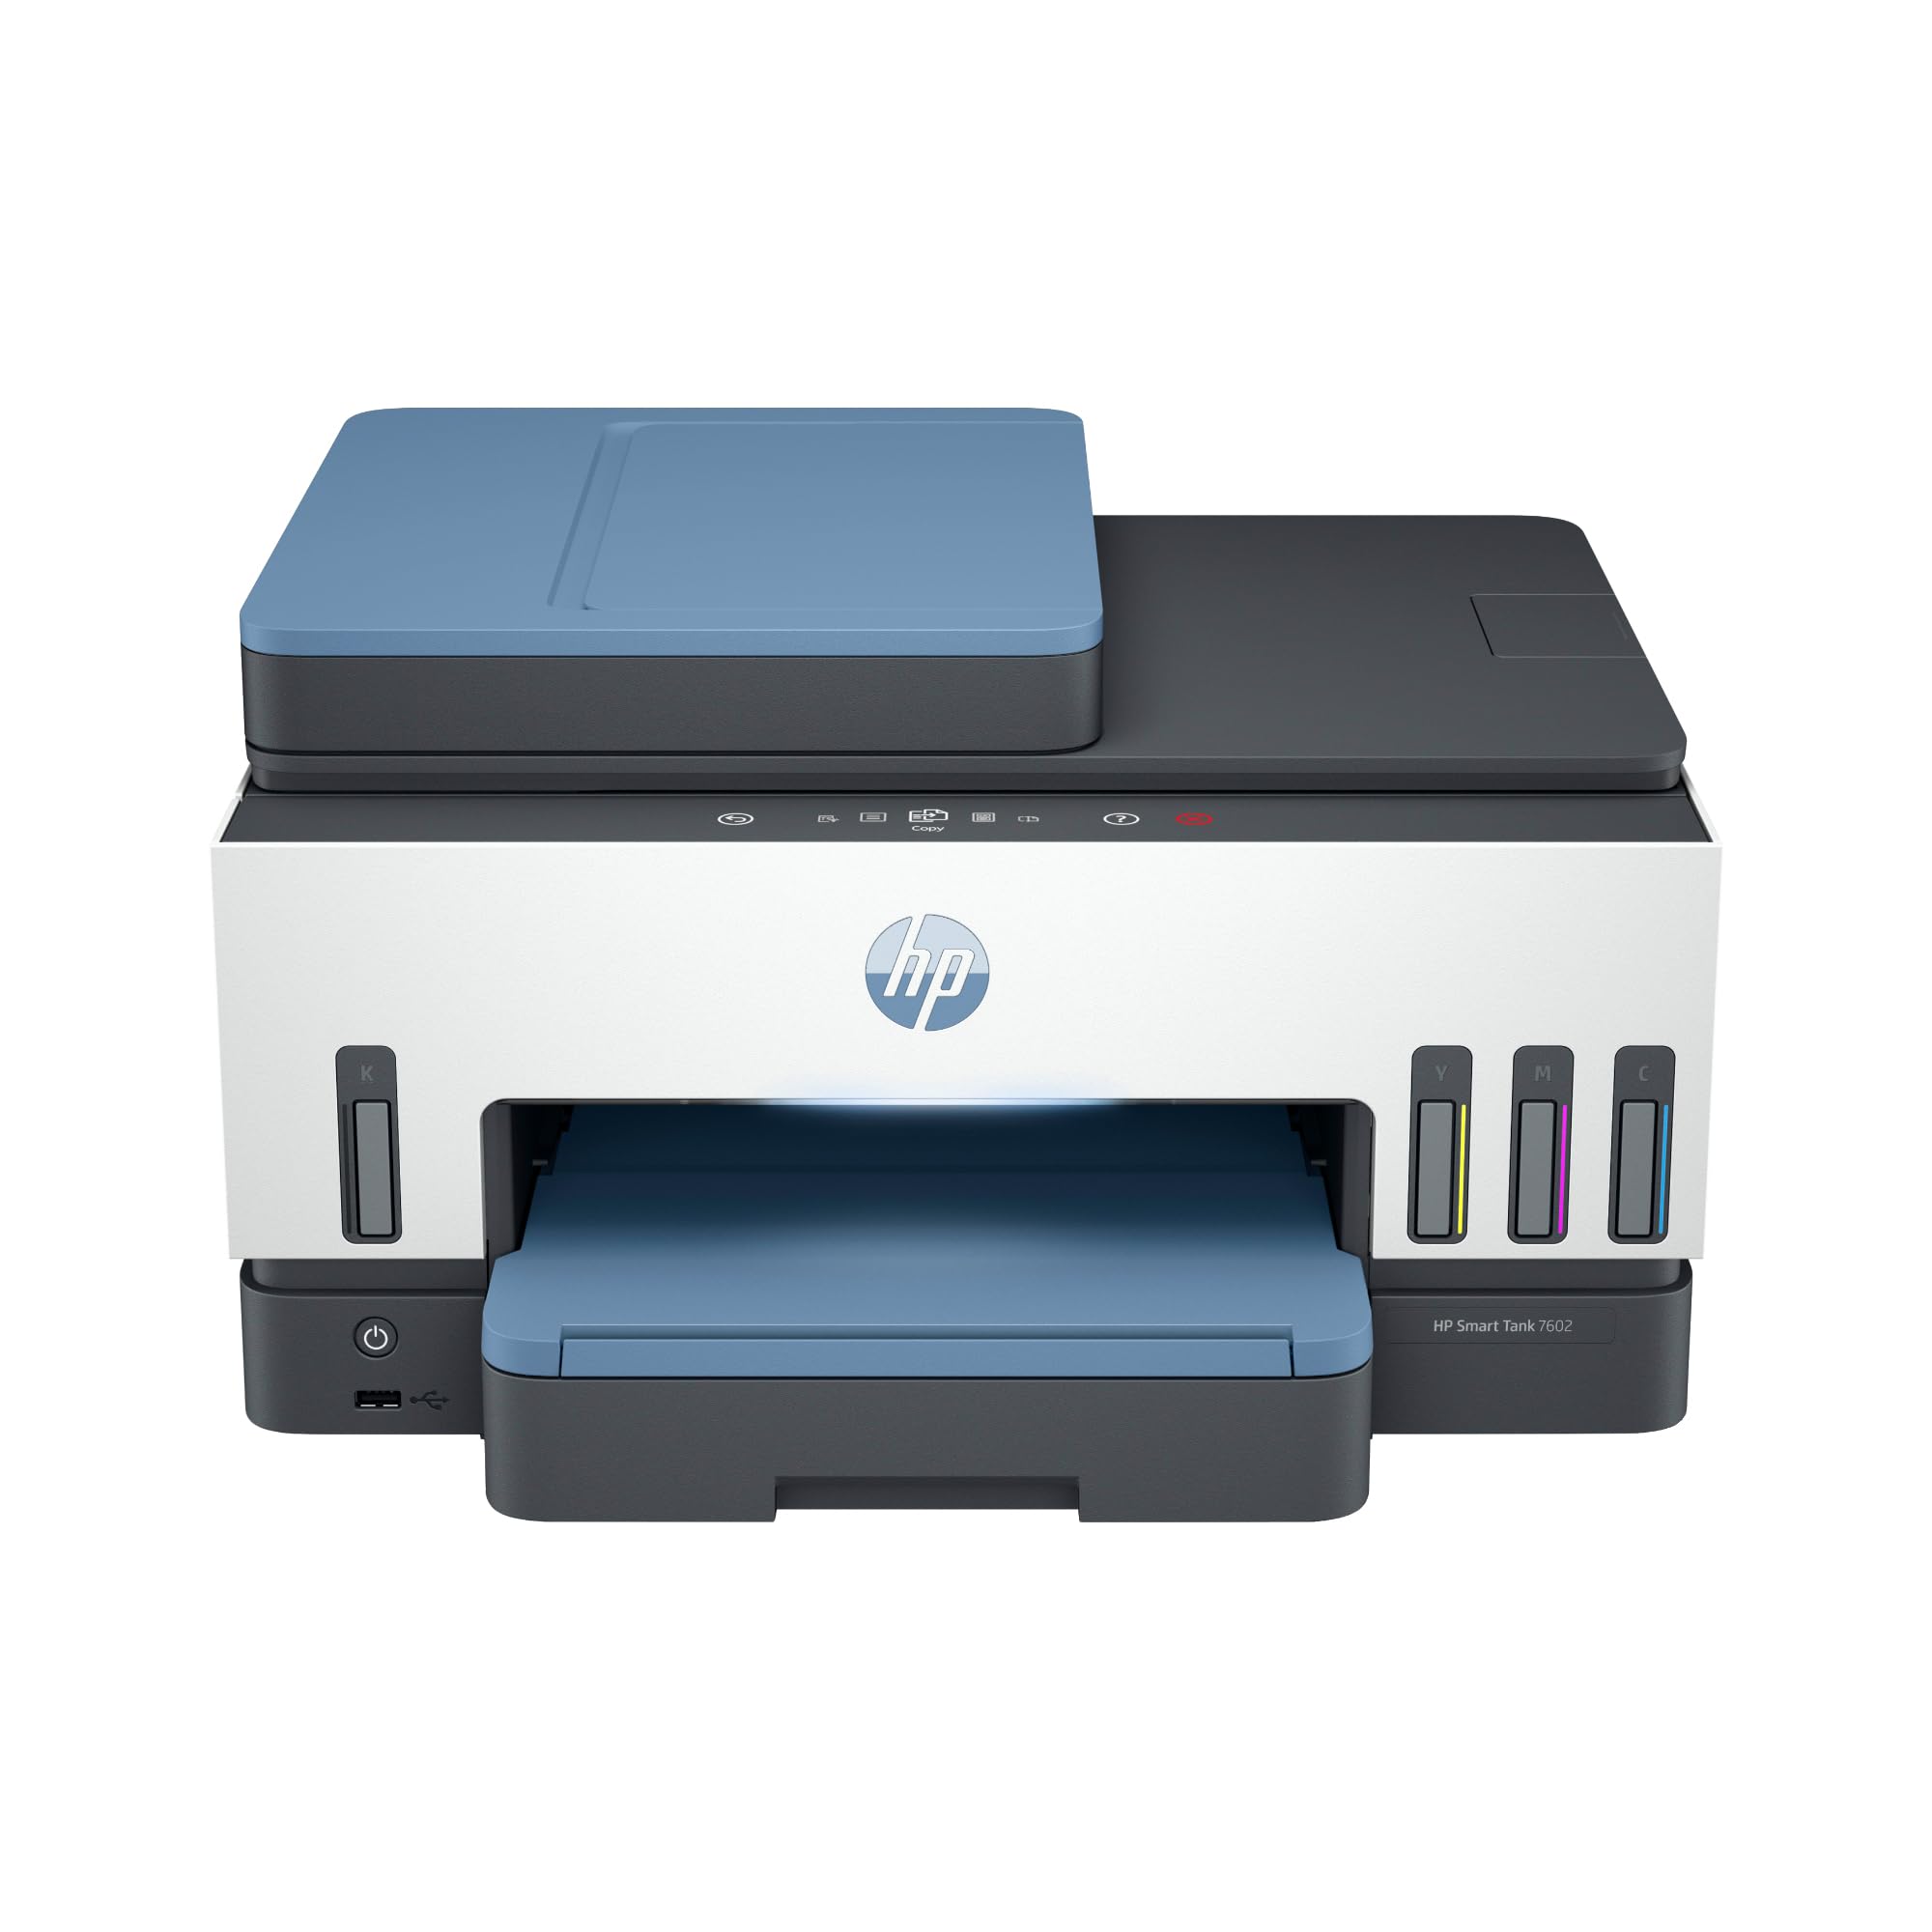 HP Smart -Tank 7602 Wireless Cartridge-free all in one printer, up to 2 years of ink included, mobile print, scan, copy, fax, auto doc feeder, featuring an app-like magic touch panel (28B98A)